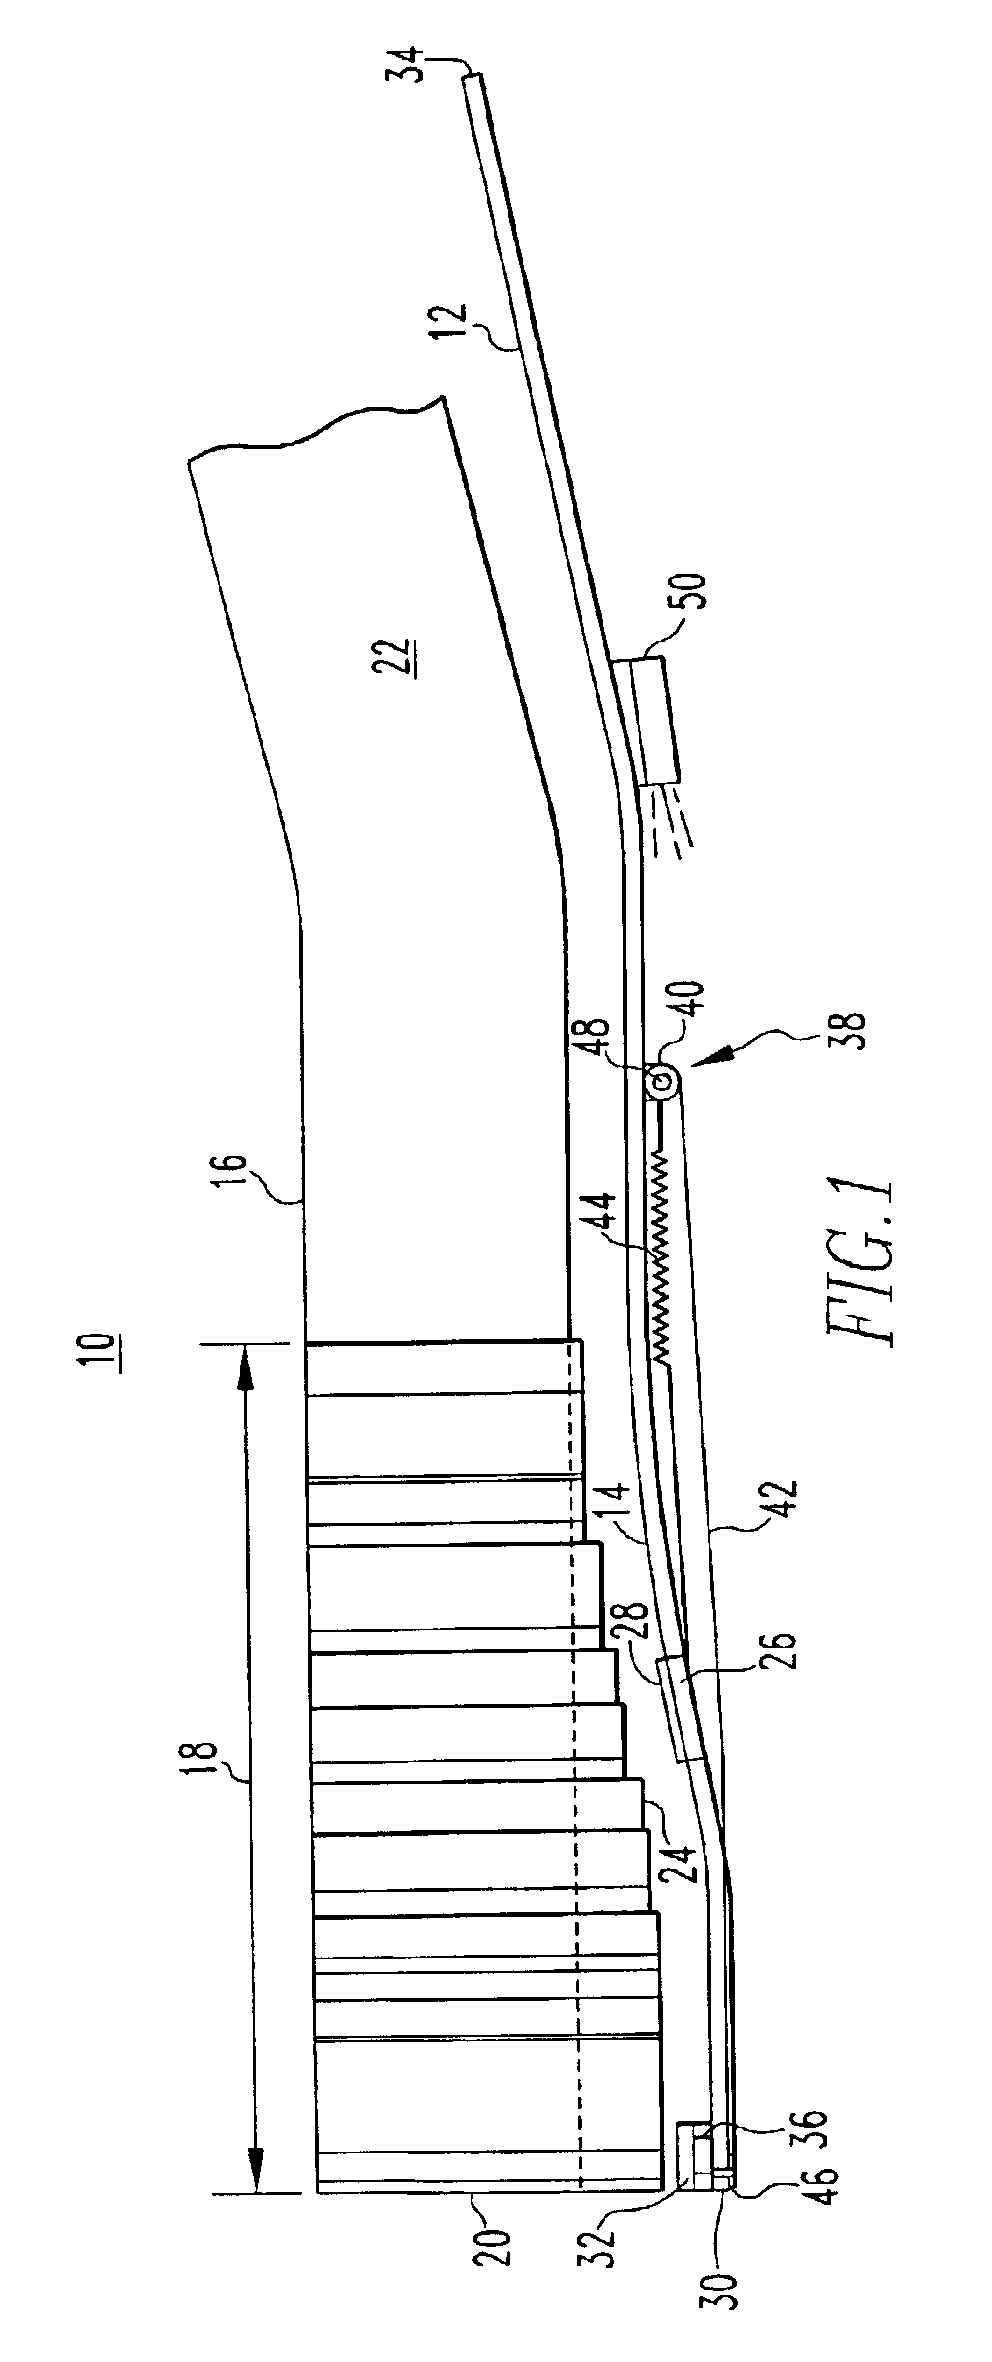 Automated stator insulation flaw inspection tool and method of operation